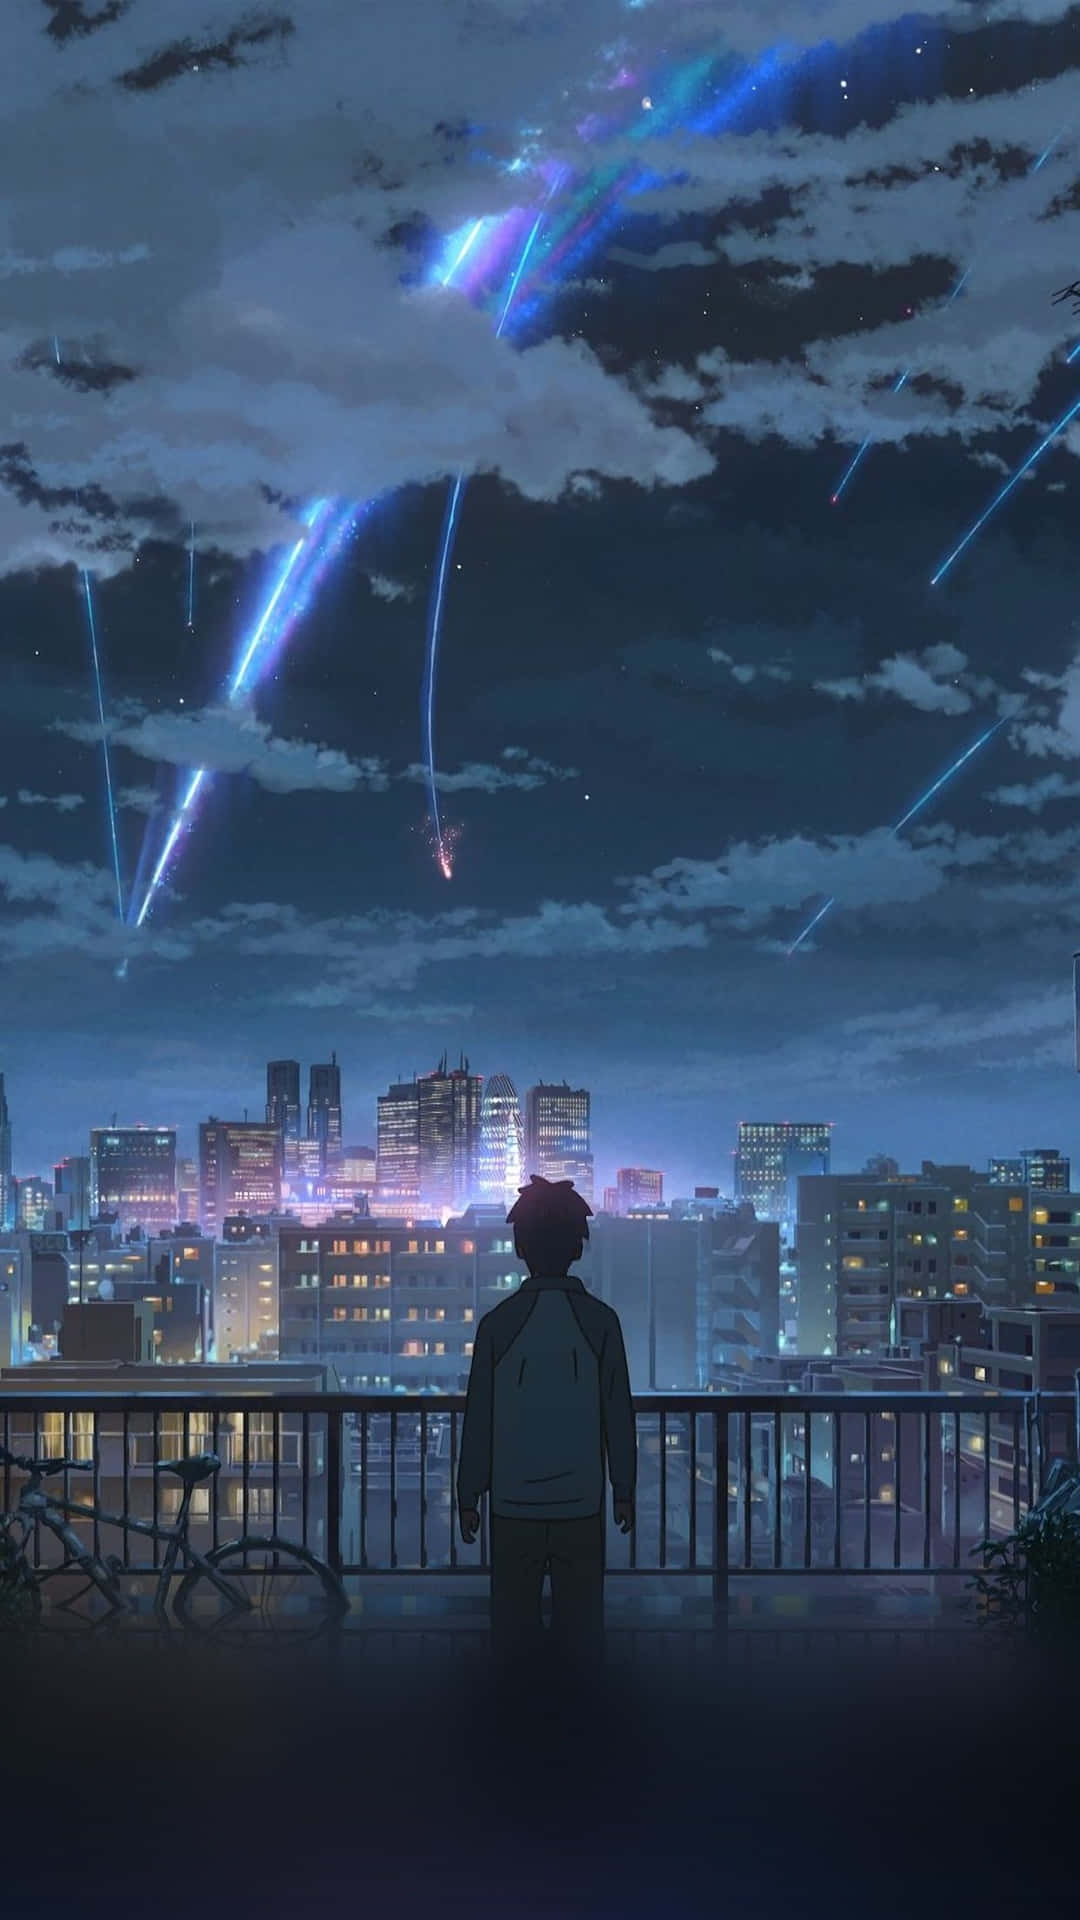 A Man Is Looking Out Over A City At Night